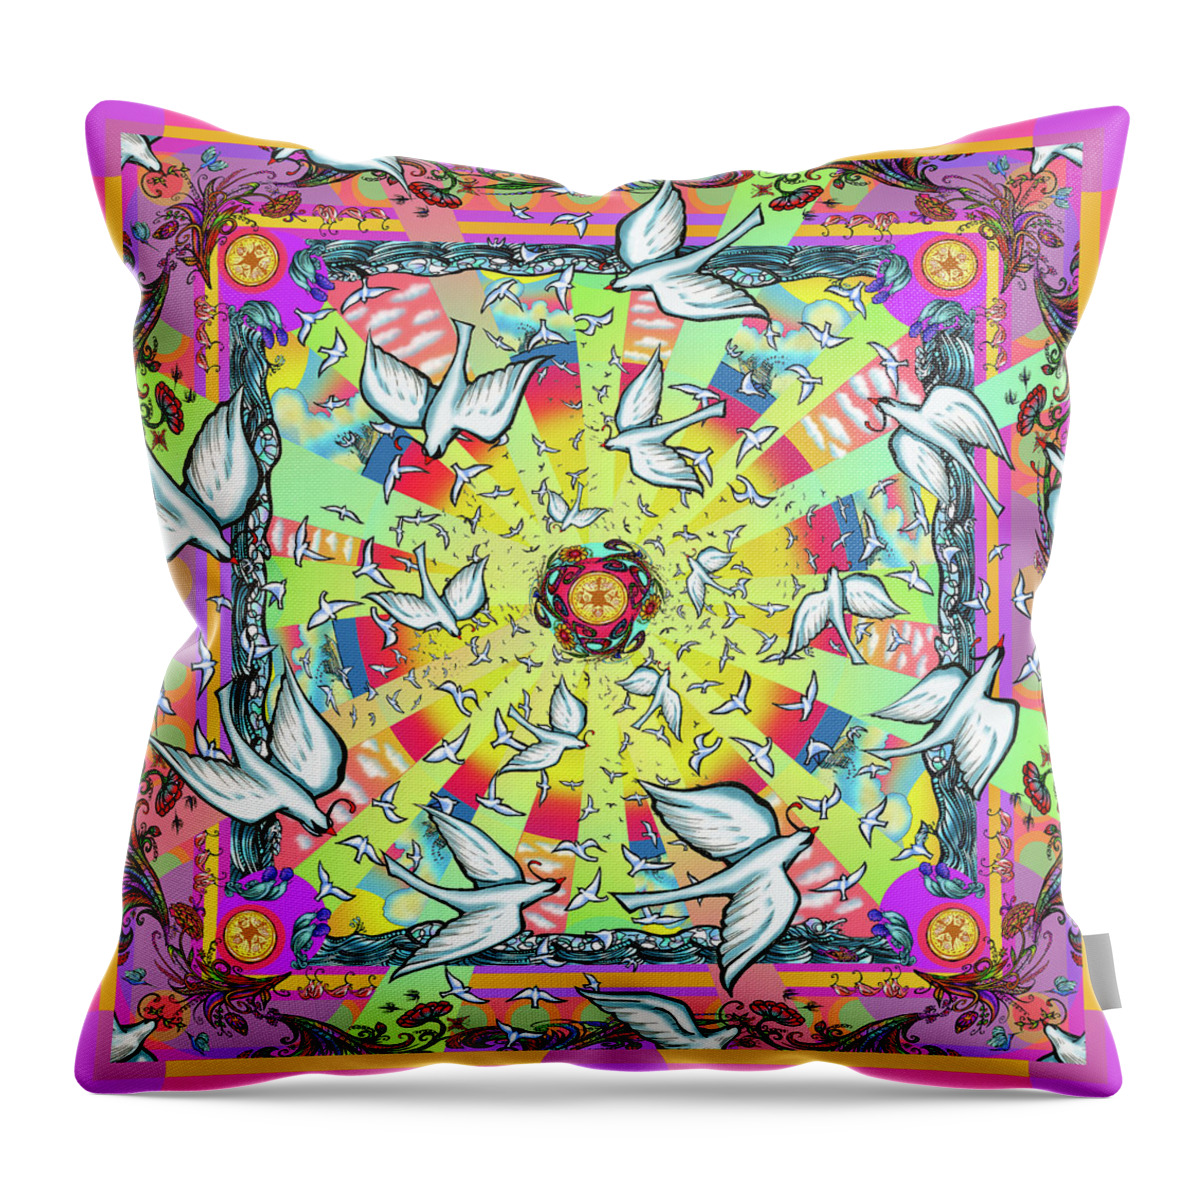  Throw Pillow featuring the mixed media Birds Of A Feather by Wagl Store